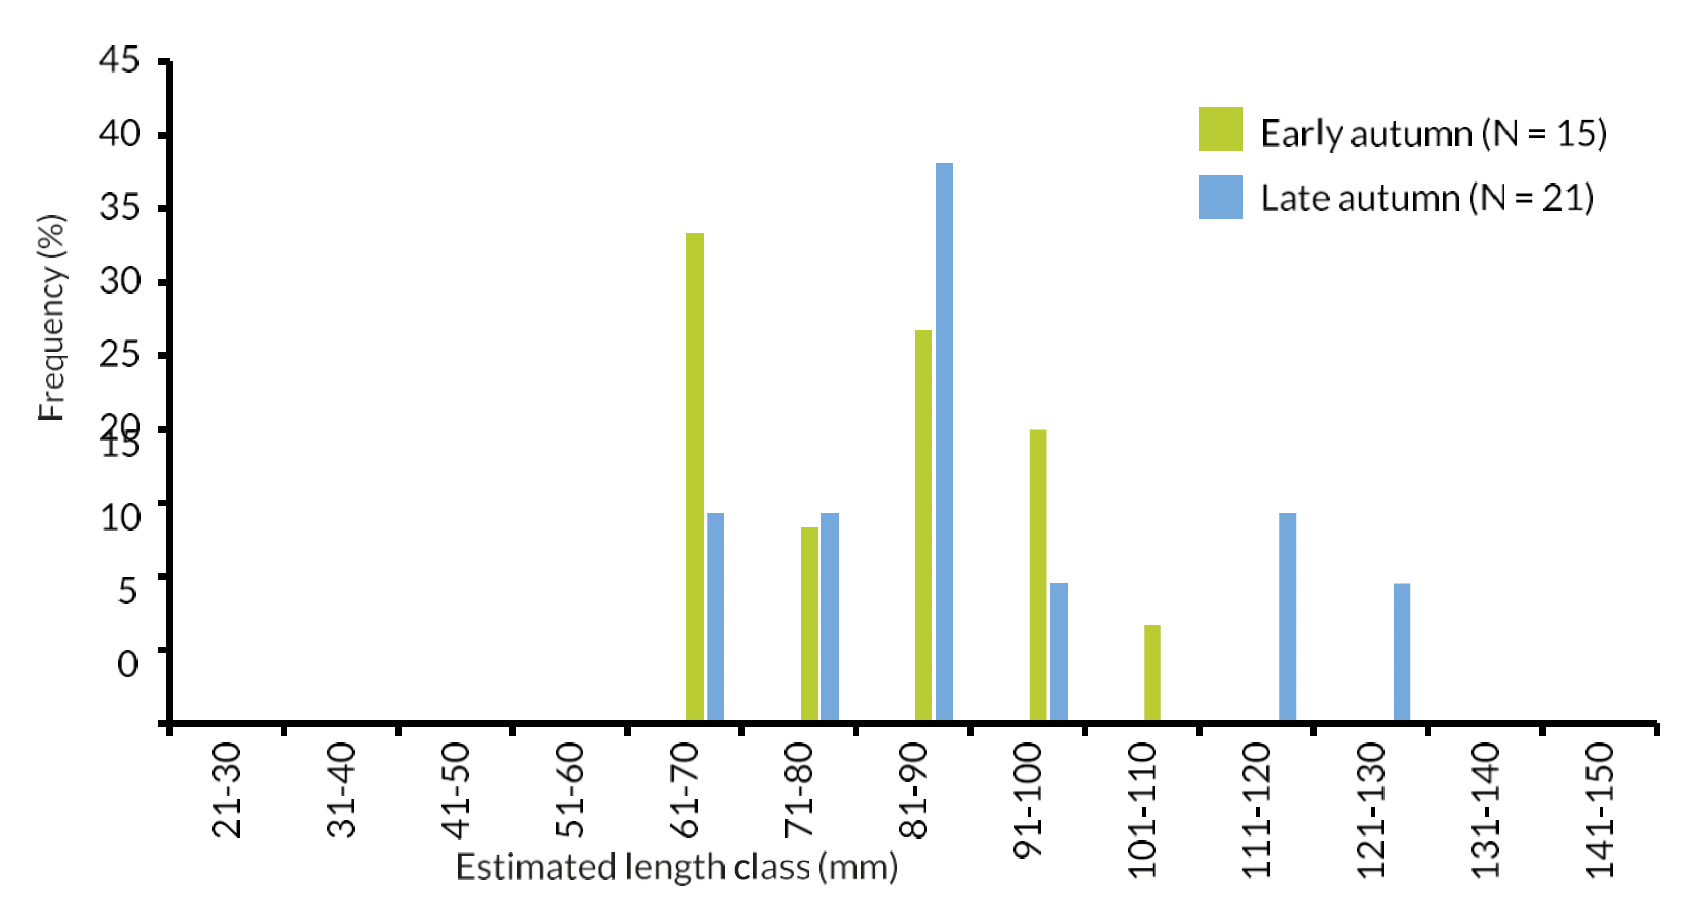 Bar chart of estimated Salmon length frequency distribution from the stomach contents of River Tweed Goosanders: early autumn (Sep-Oct 2019) sample and late autumn (Nov 2019) sample